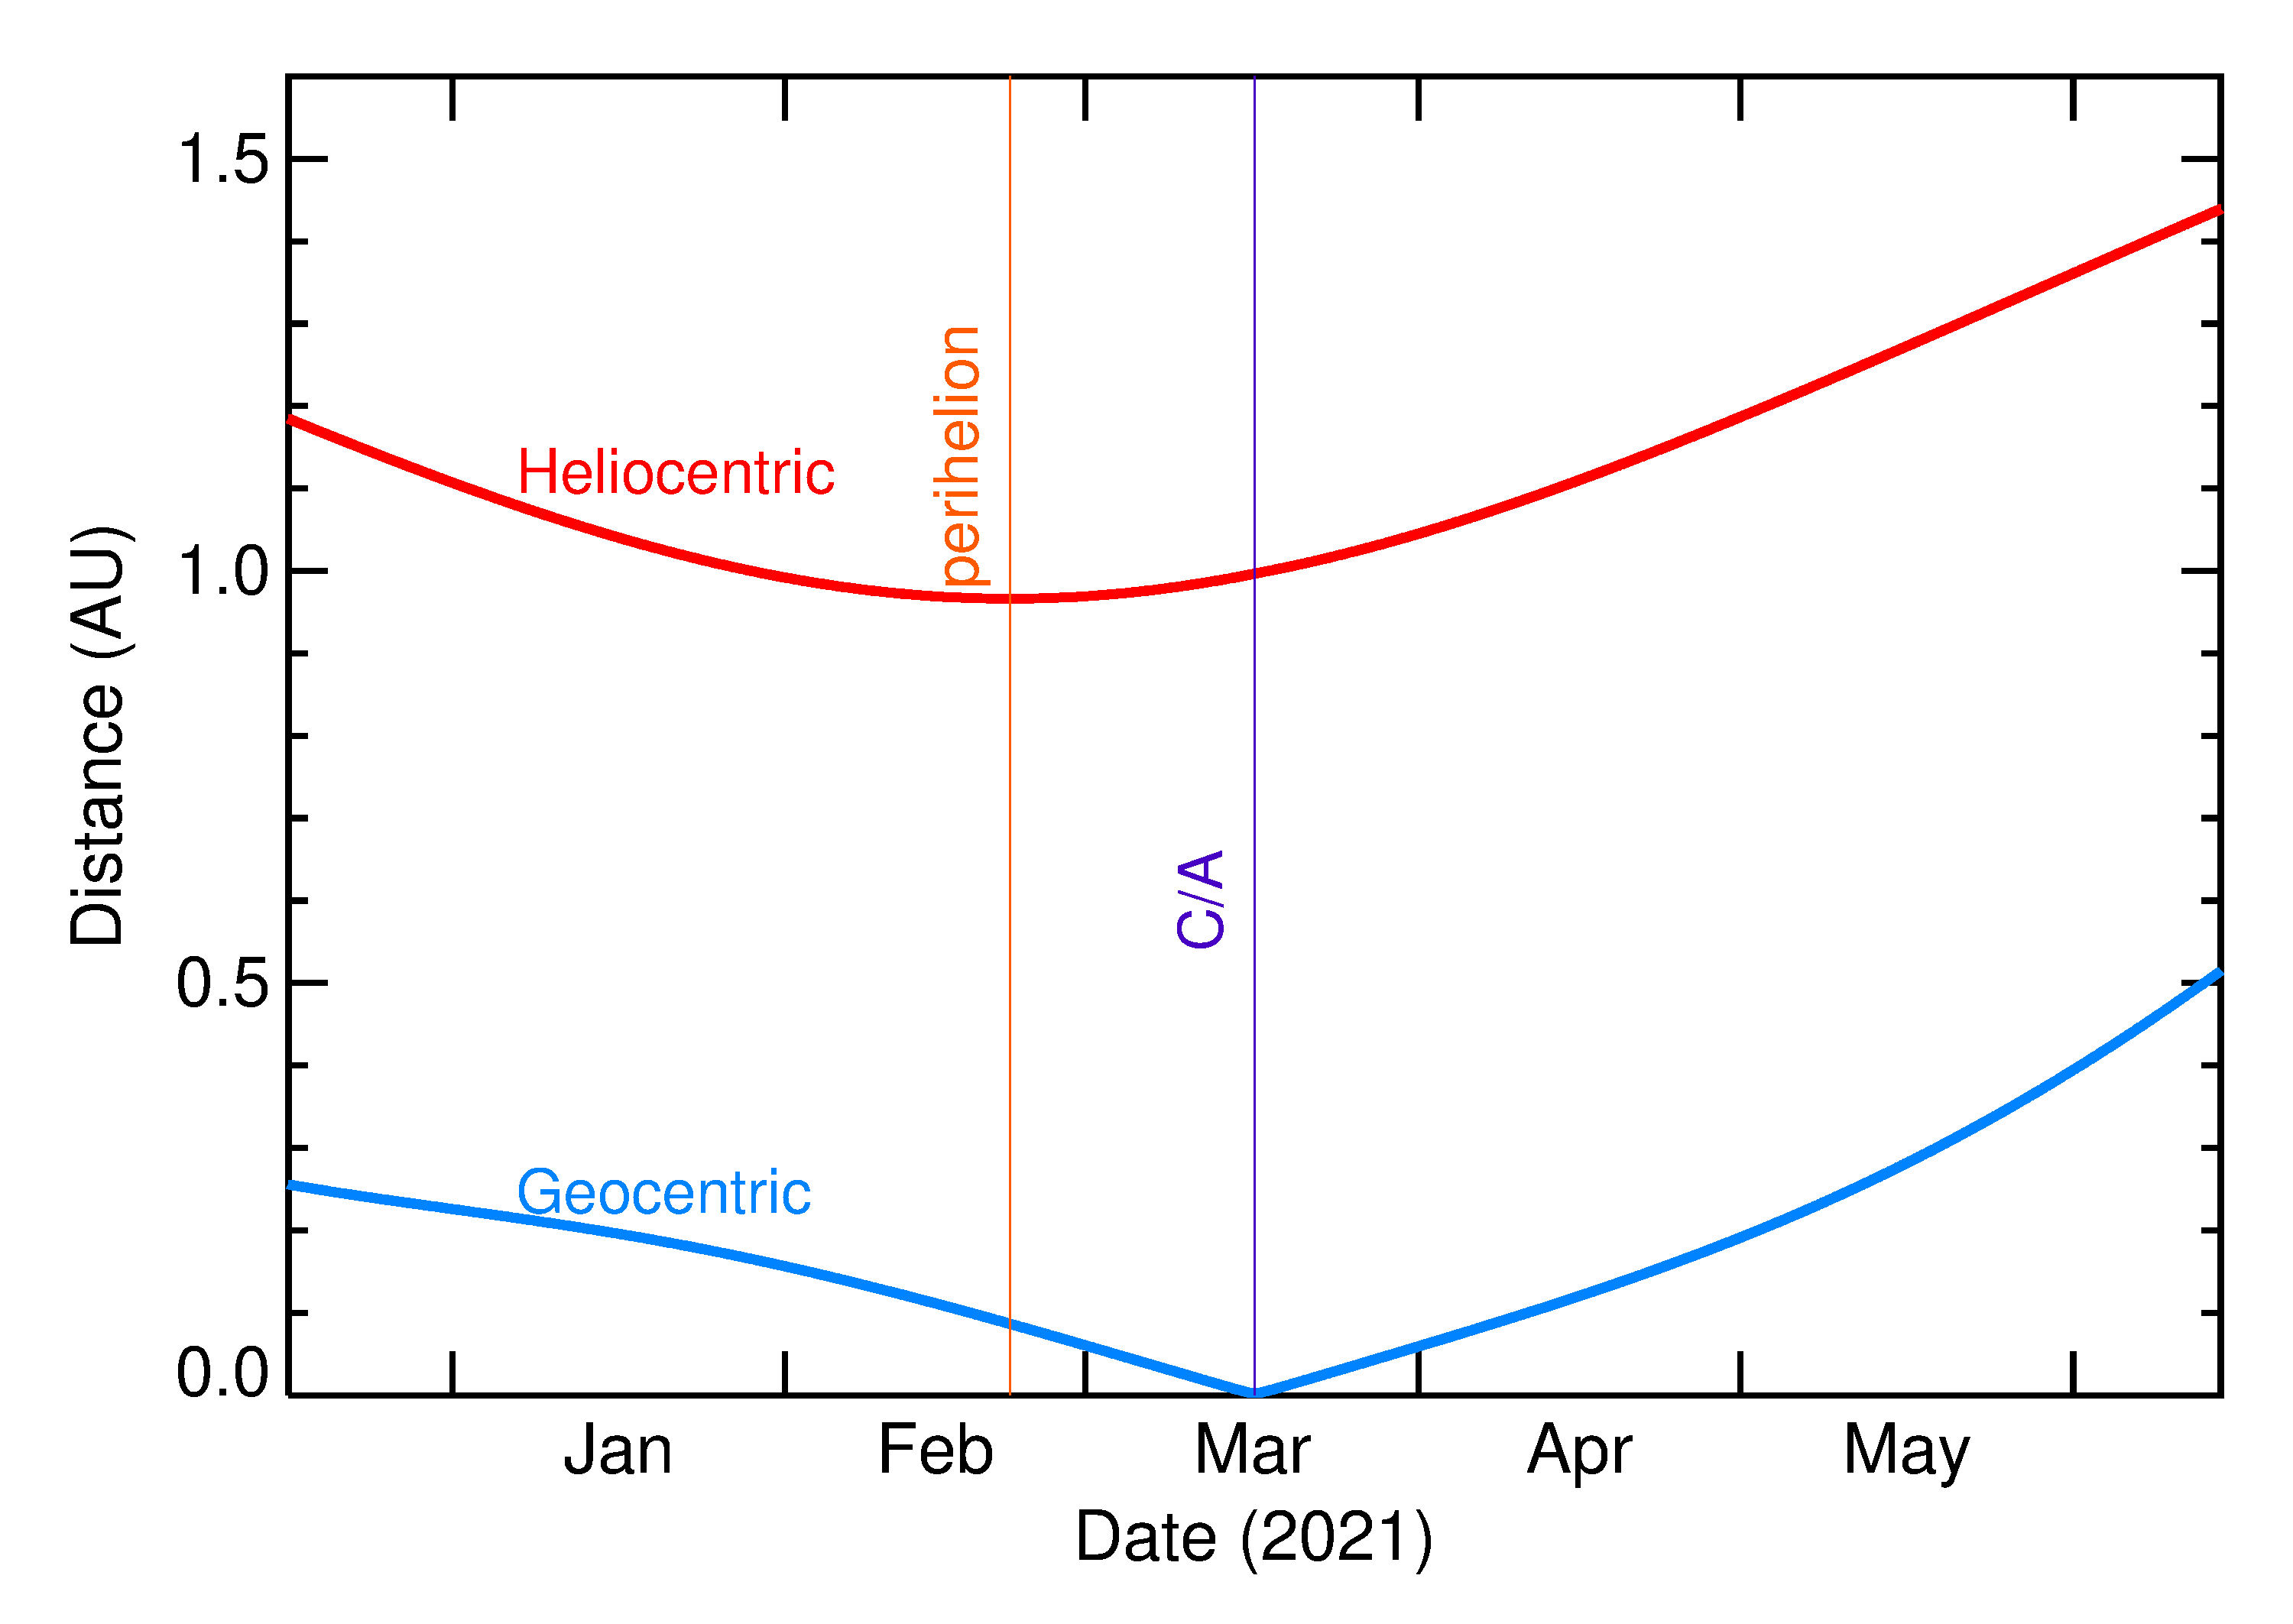 Heliocentric and Geocentric Distances of 2021 EP4 in the months around closest approach